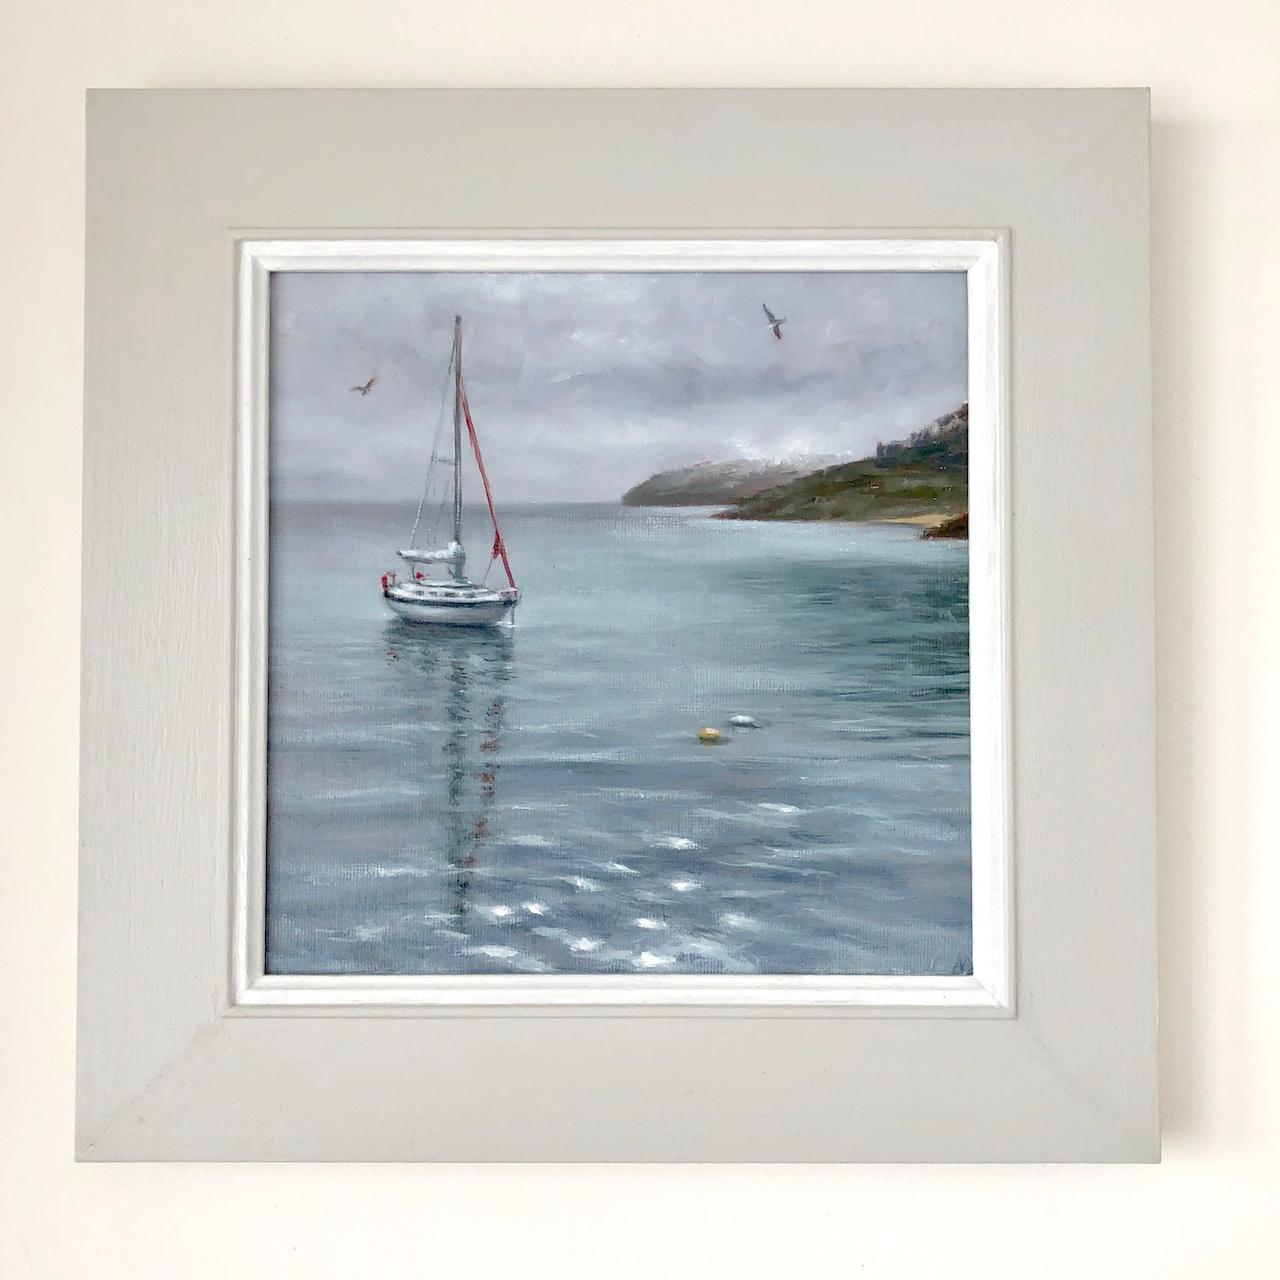 Marie Robinson
Calm Mooring
Original Still Life Painting
Oil Paint on Board
Board Size: H 20cm x W 20cm x D 0.5cm
Image size: H 19 cm x W 19cm x D 0.5cm
Framed Size: H 29cm x W 29cm x D 2cm
Sold Framed in a Light Grey Box Frame
Please note that